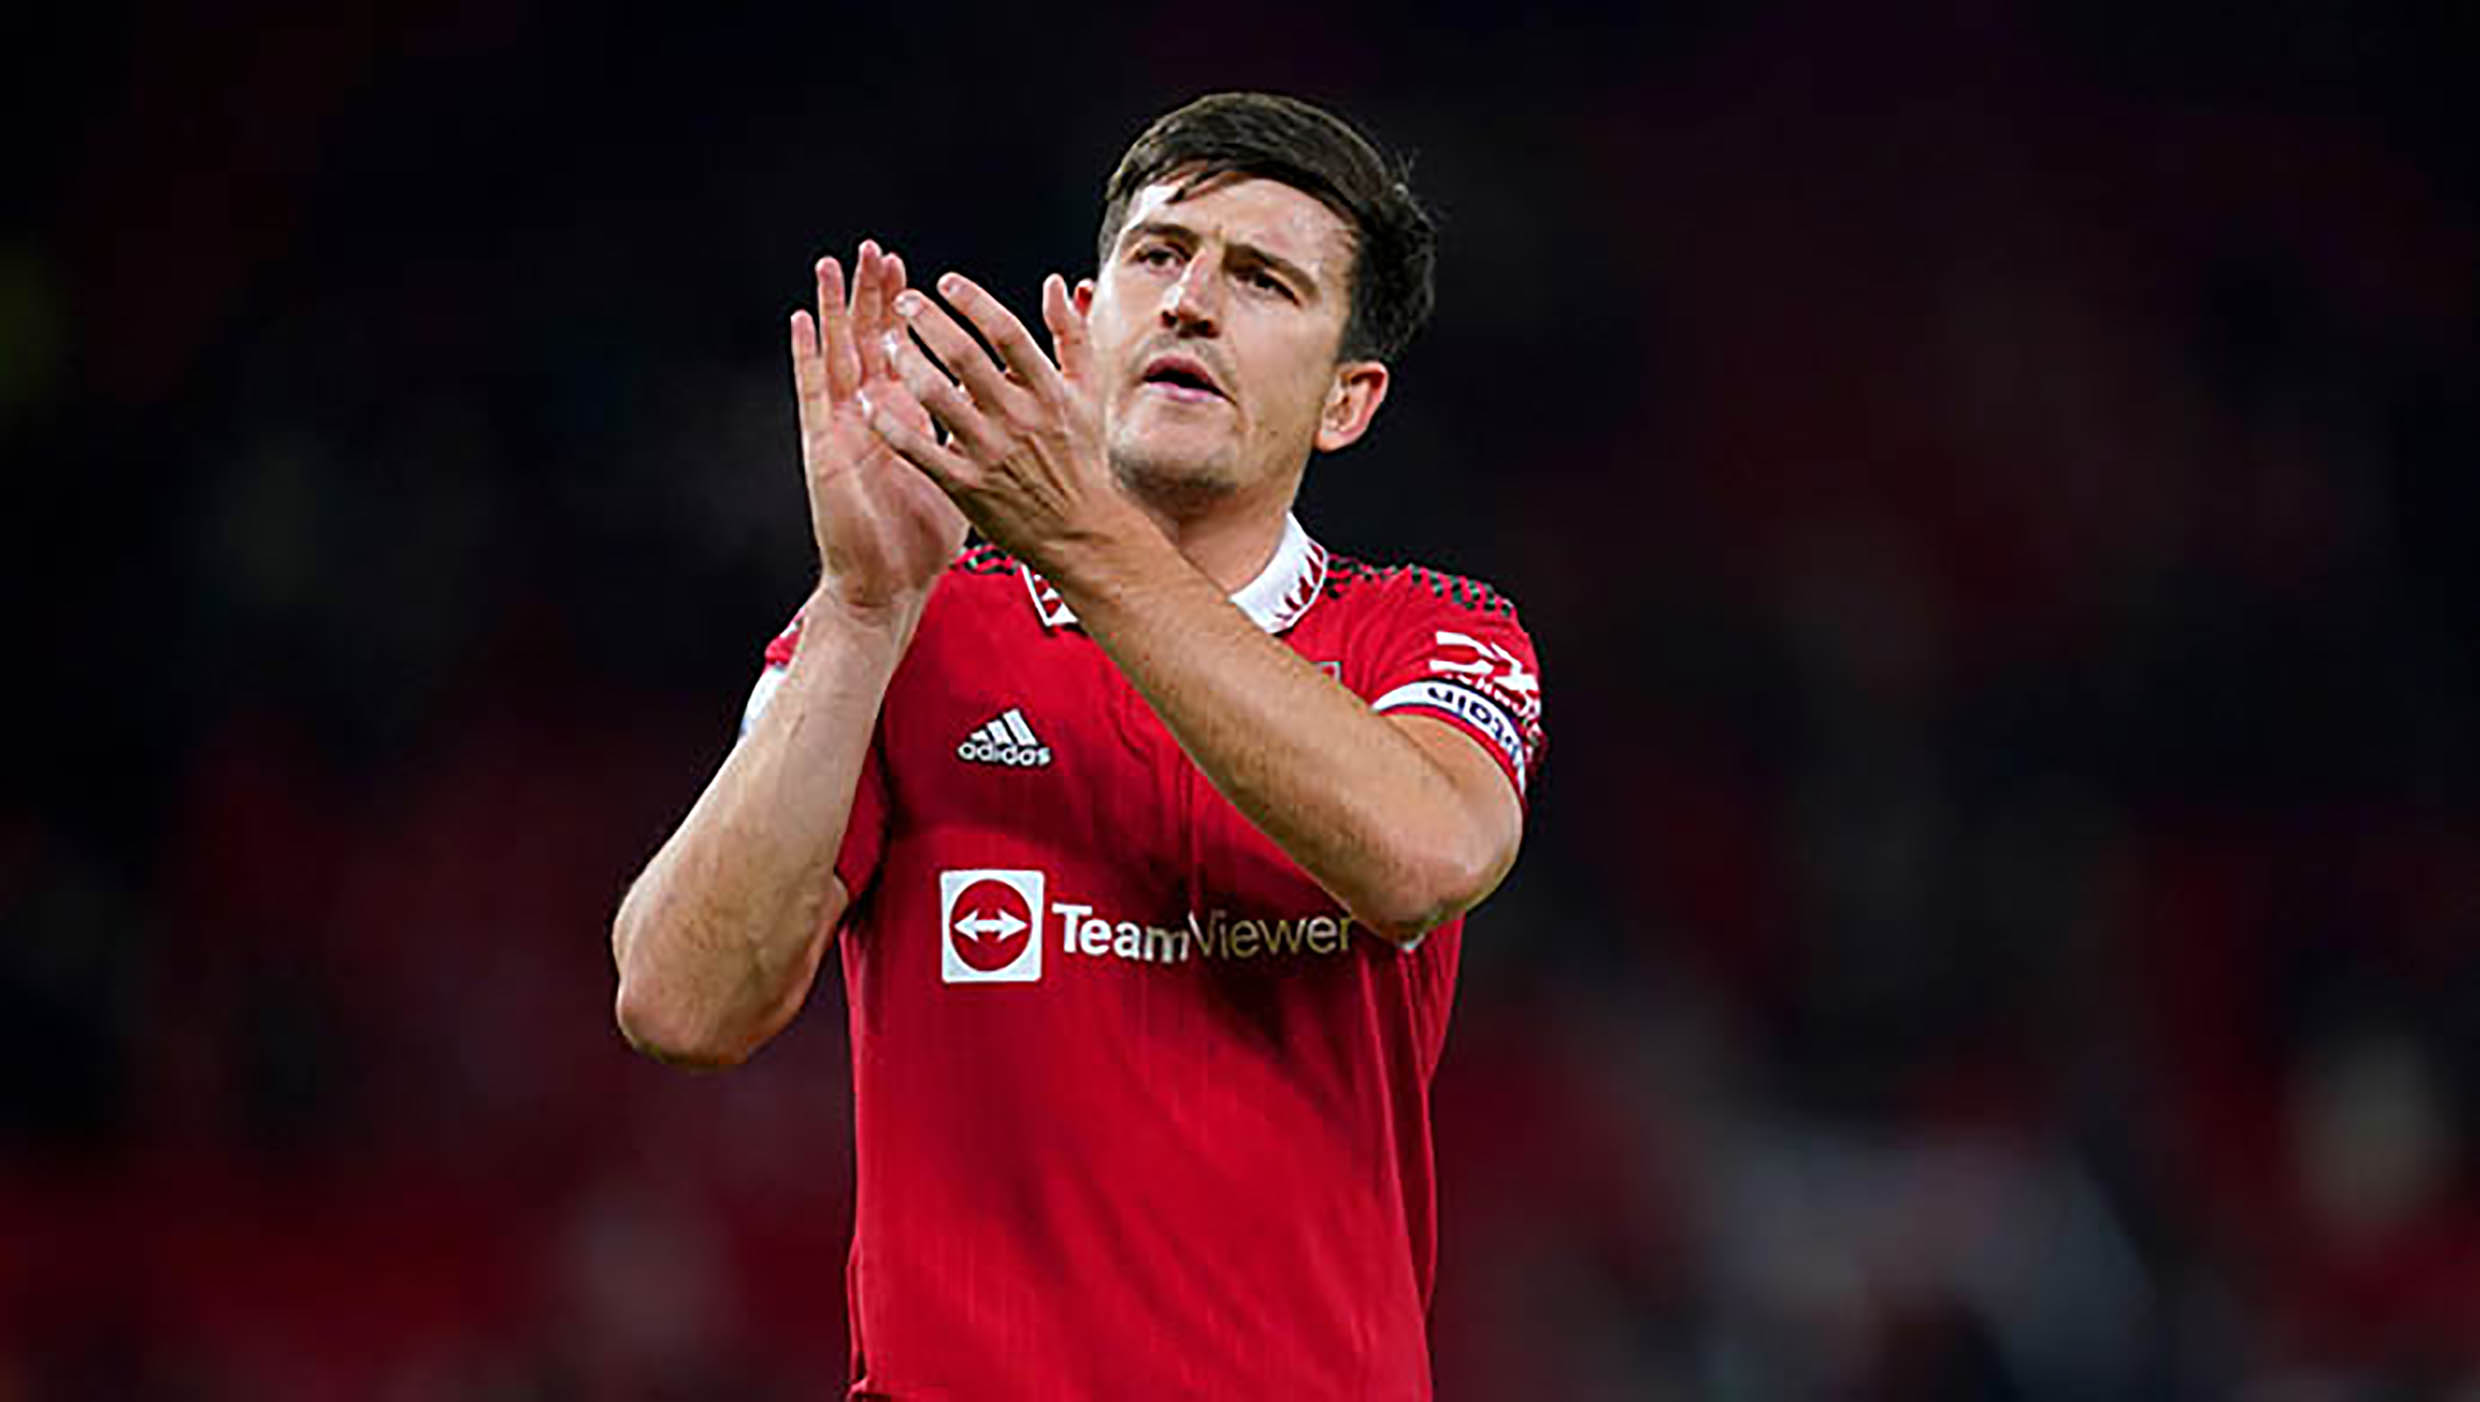  Harry Maguire.